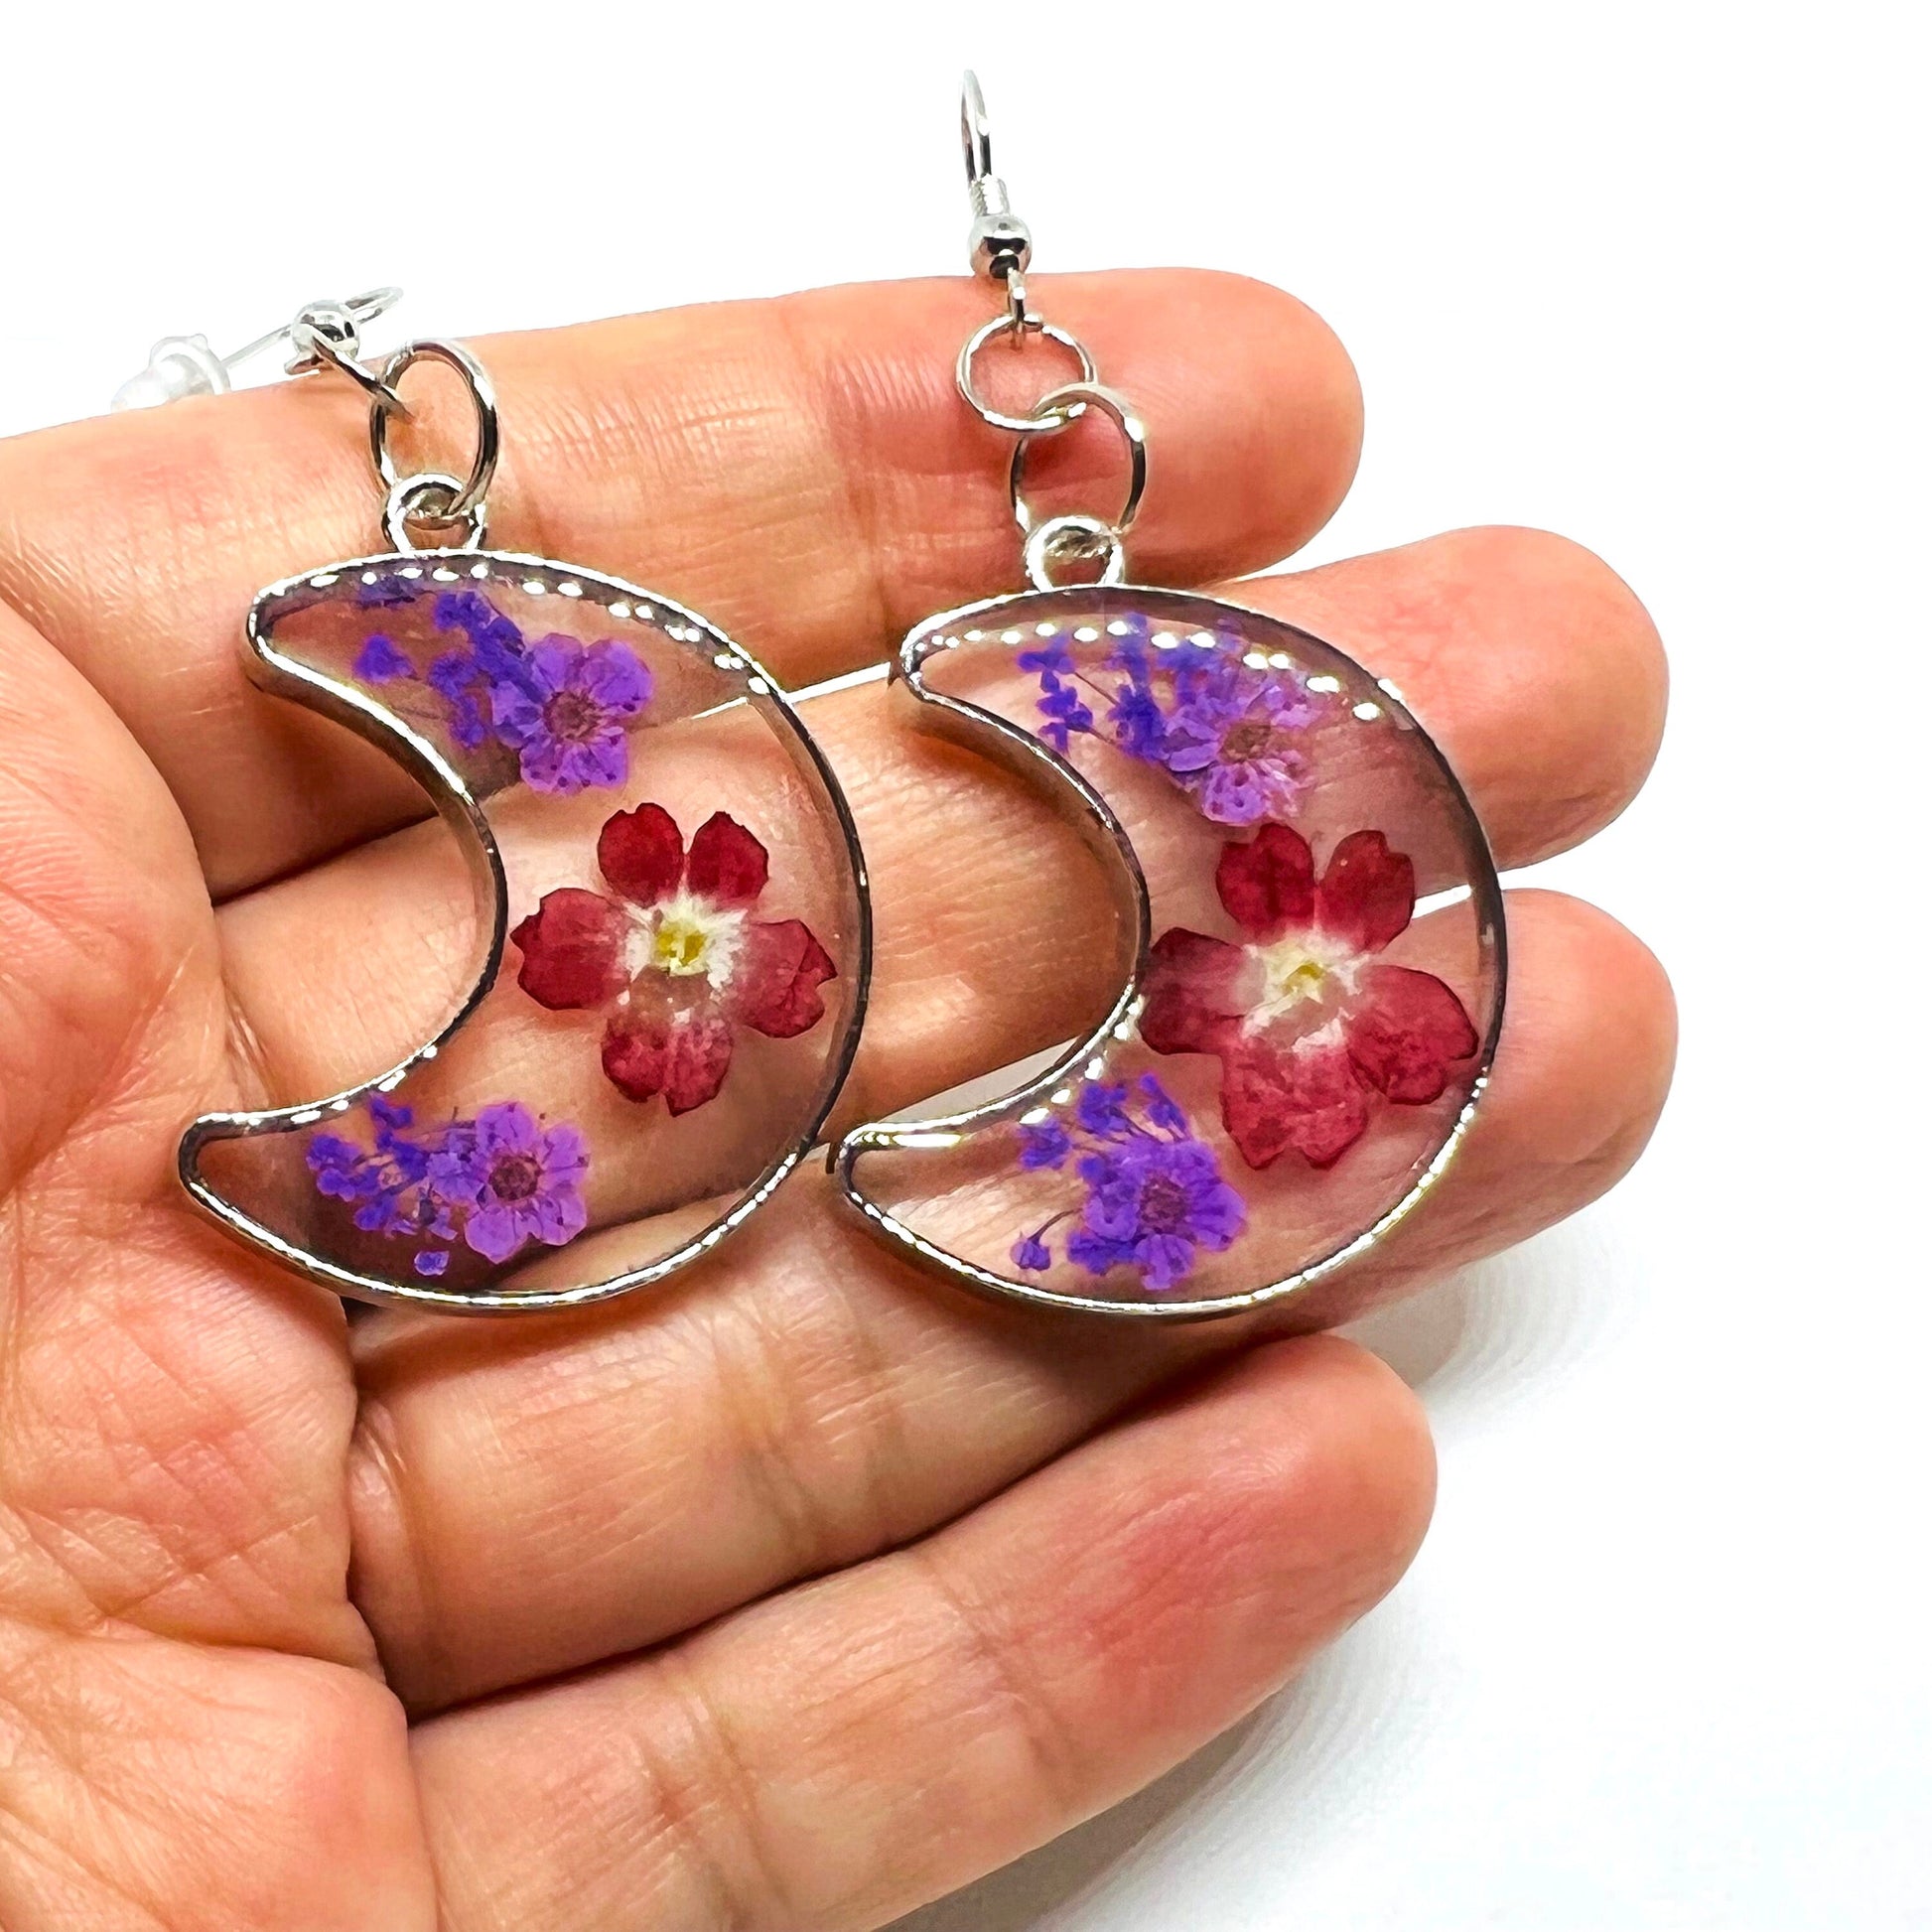 Lovingly Crafted Moon Shape Earrings with Wild Dried Flowers Frida Inspired Jewelry Summer Fashion Casual Outfit Girls Women Cute Gift Idea